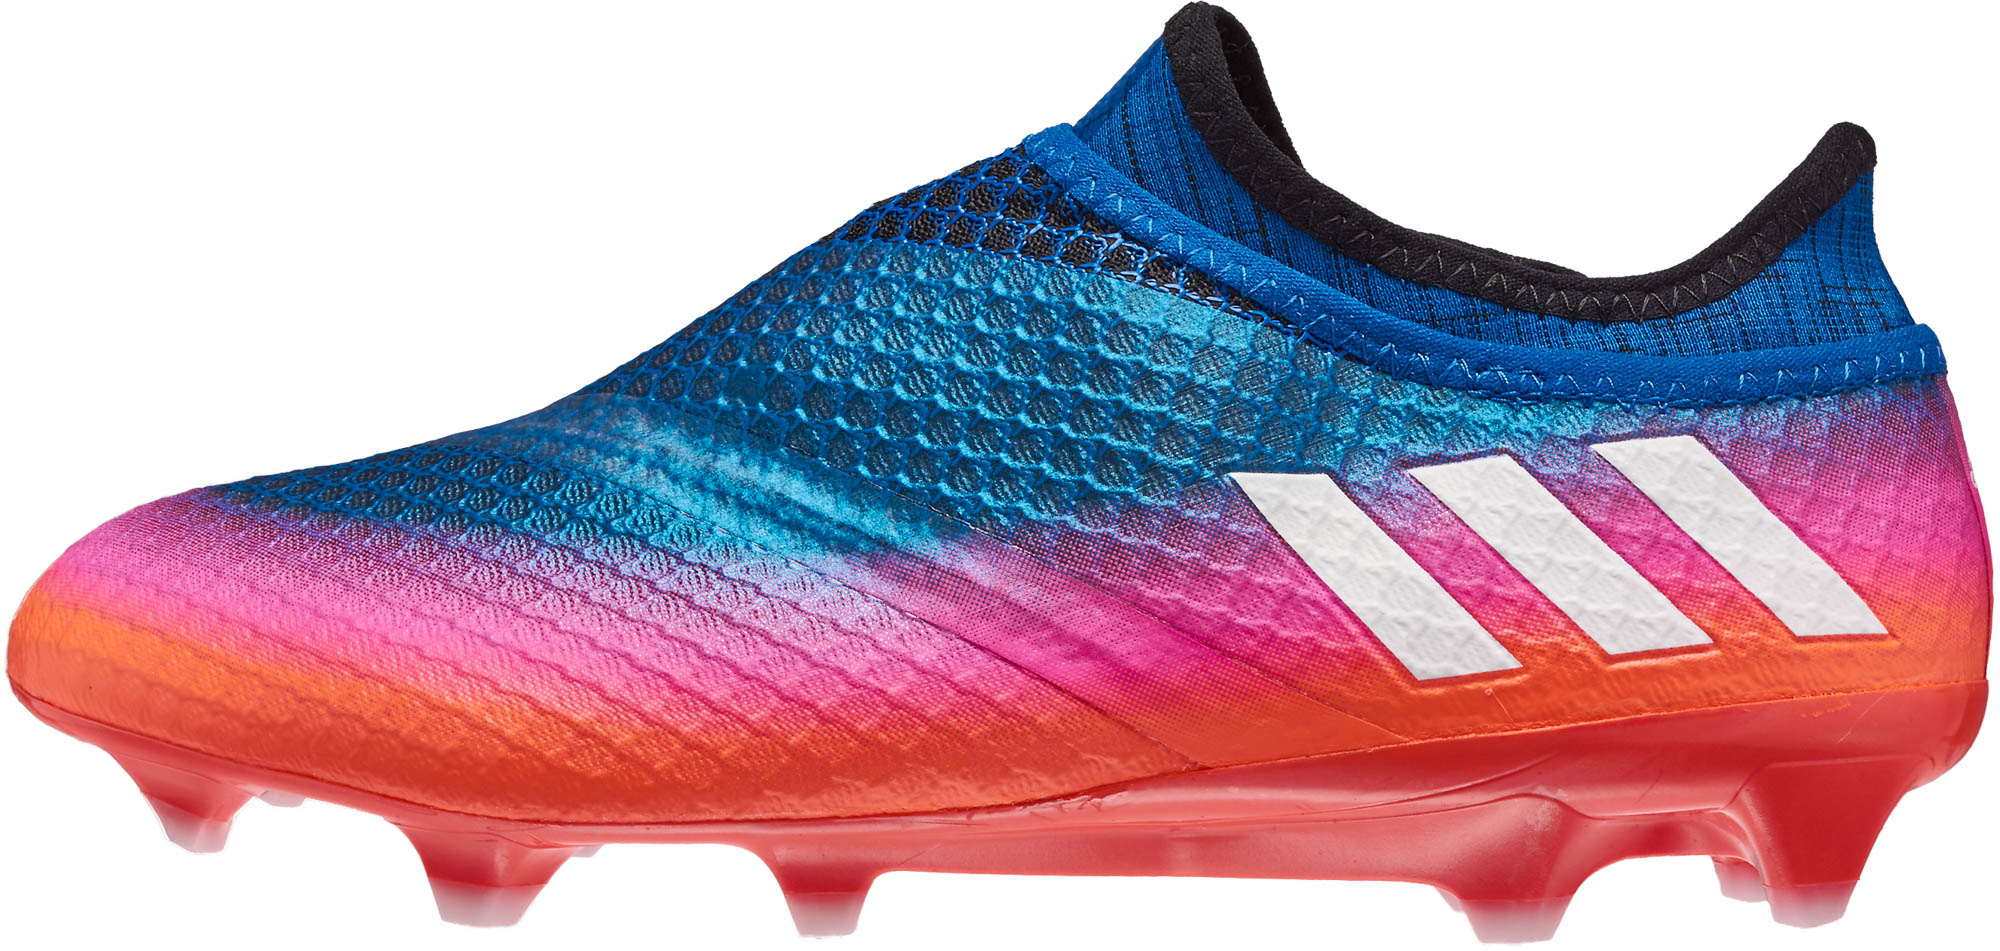 Bron afdeling Experiment adidas Messi 16 Pureagility FG Cleats - adidas Messi Soccer Cleats